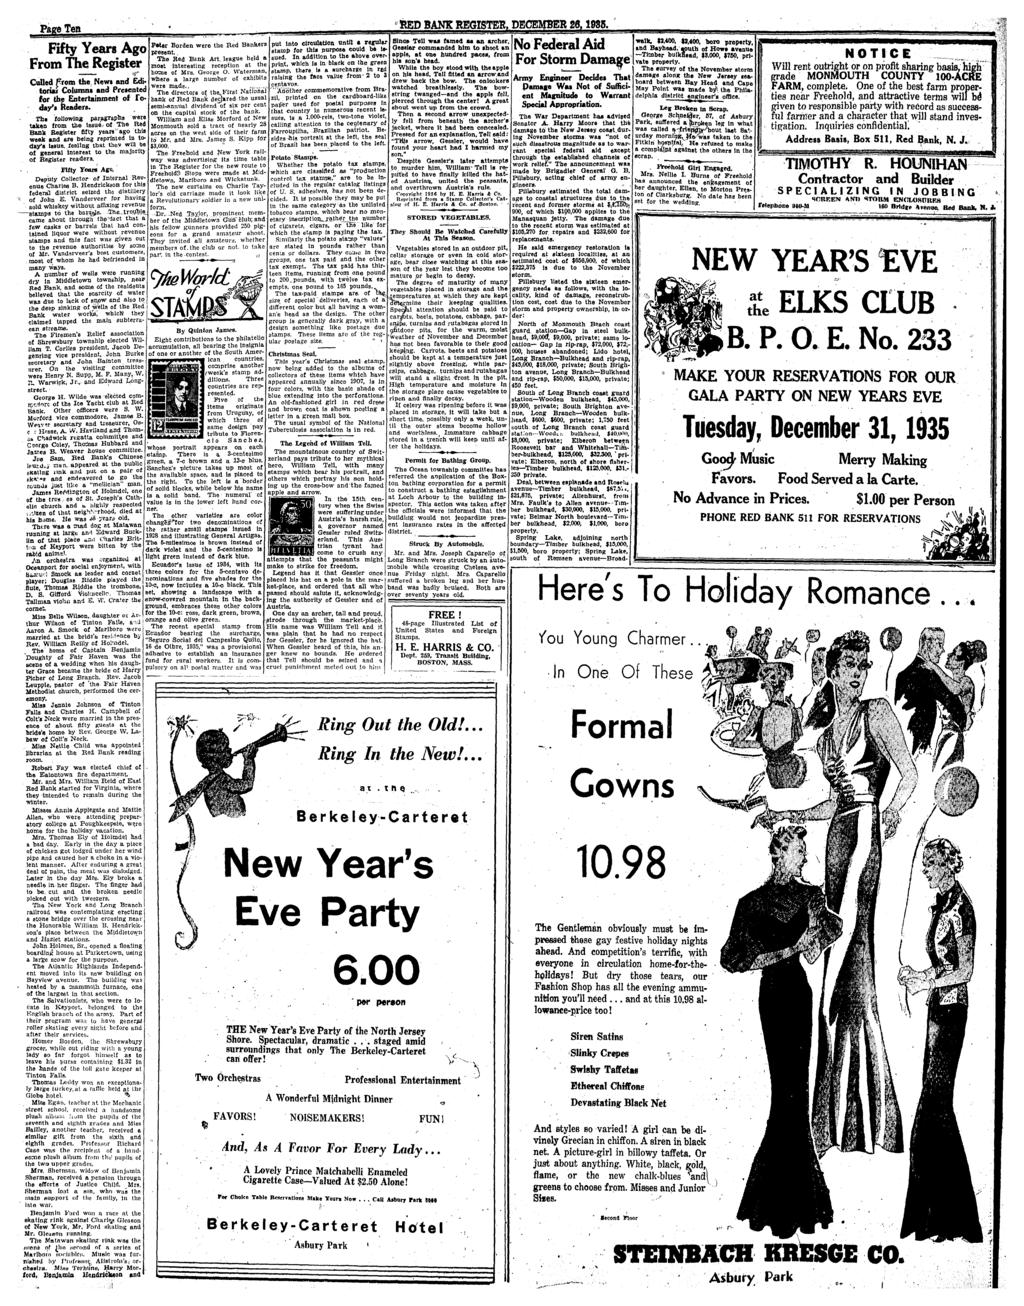 Para Ten RED BANK REGSTER, DECEMBER 26,1935. No Federal Ad For Storm Damage Ffty Years Ago From The Regster Culled From the Newt and Ed.